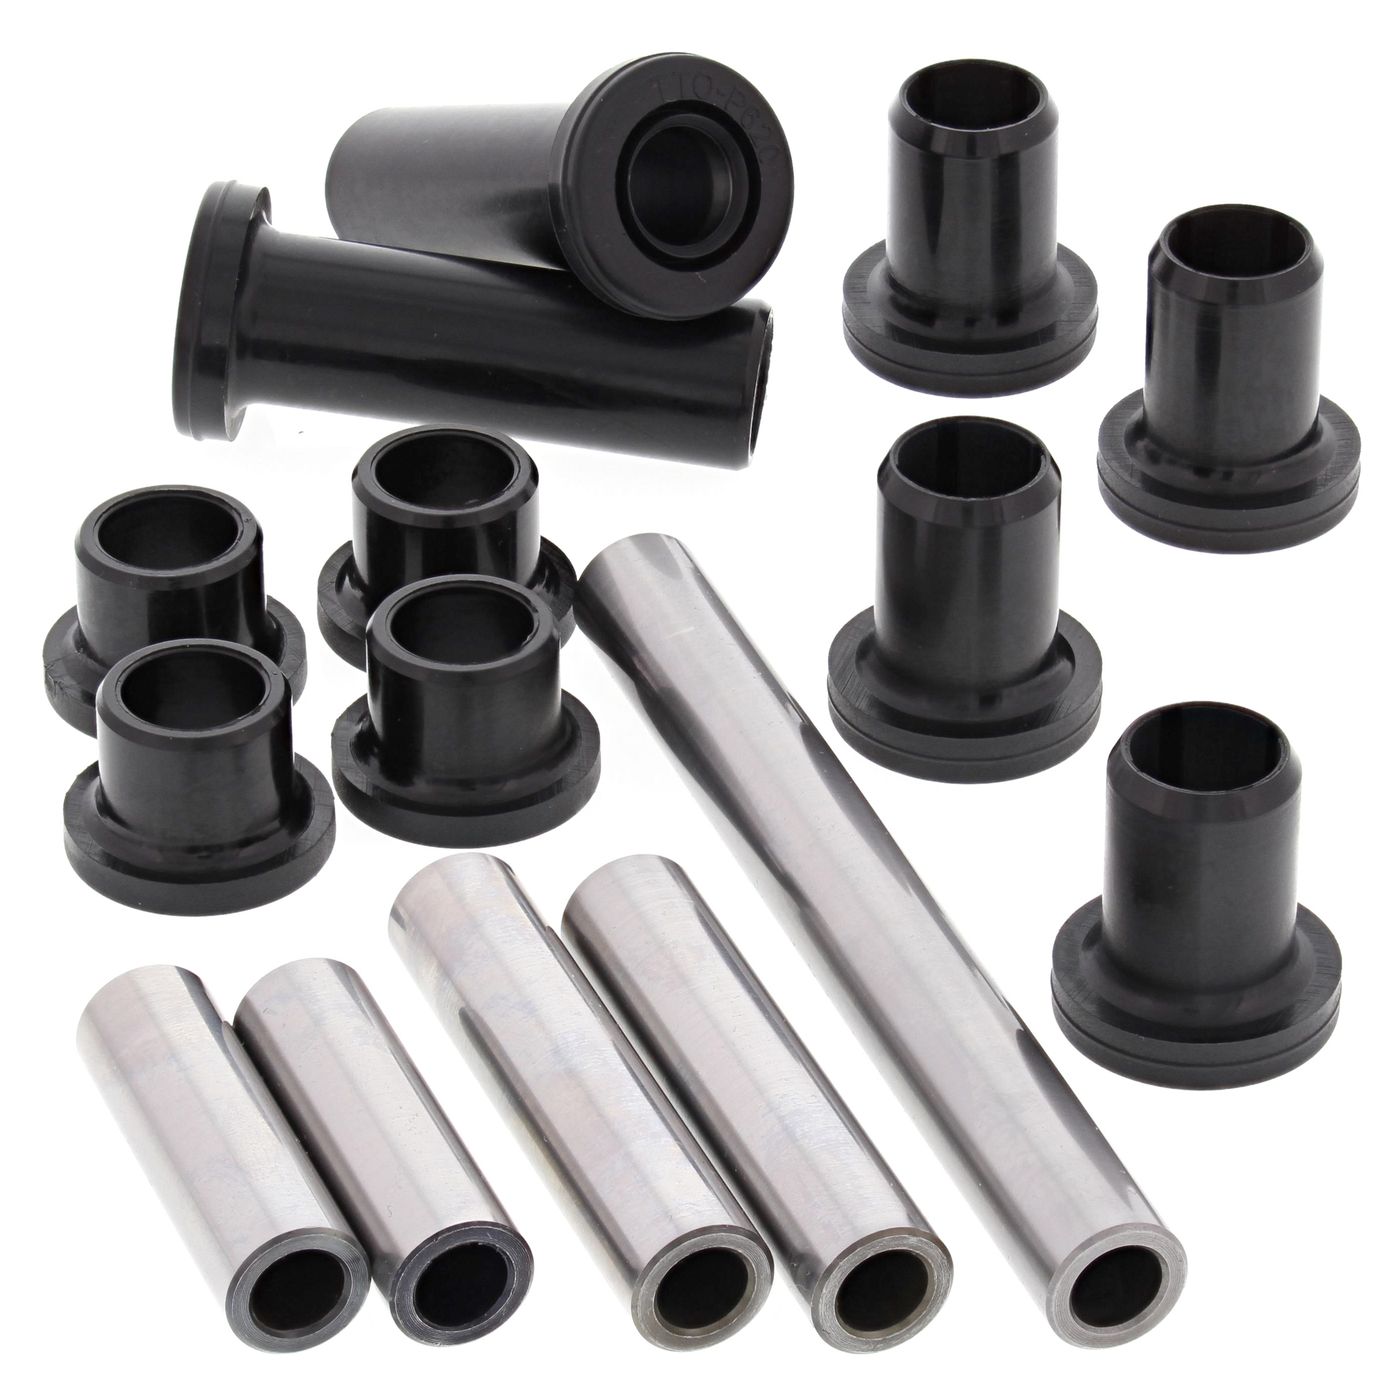 Wrp Rear Ind. Suspension Kits - WRP501156 image